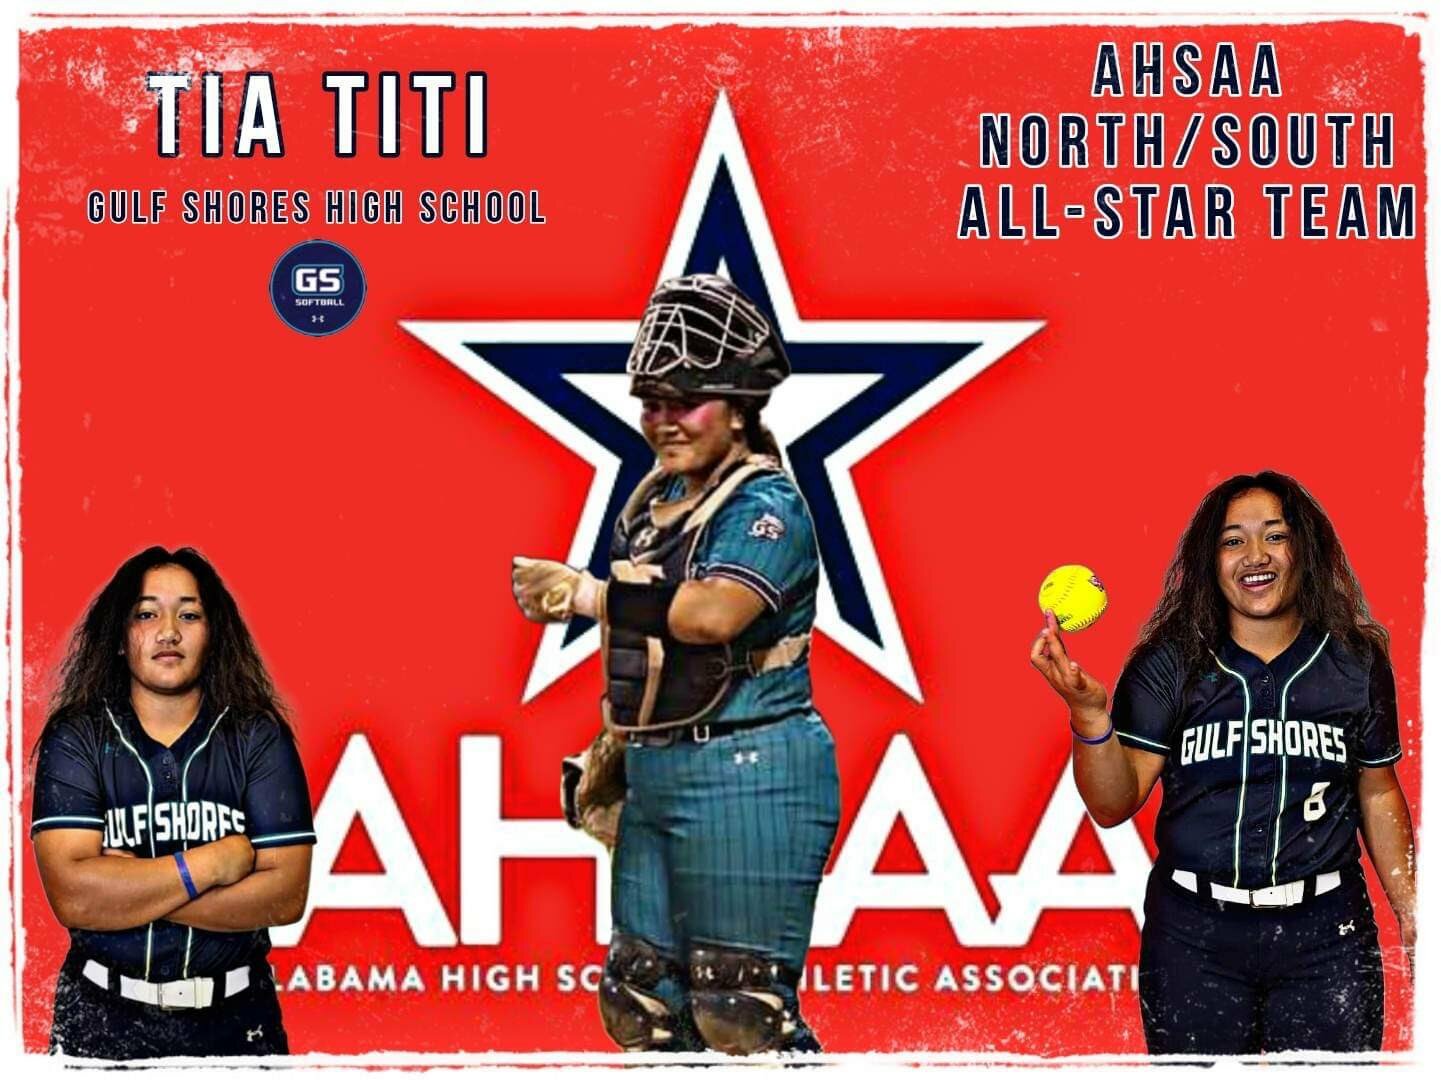 Gulf Shores rising senior and NC State commit Tia Titi will represent the Dolphins in Montgomery this summer at the AHSAA North-South All-Star game July 19 at Lagoon Park.